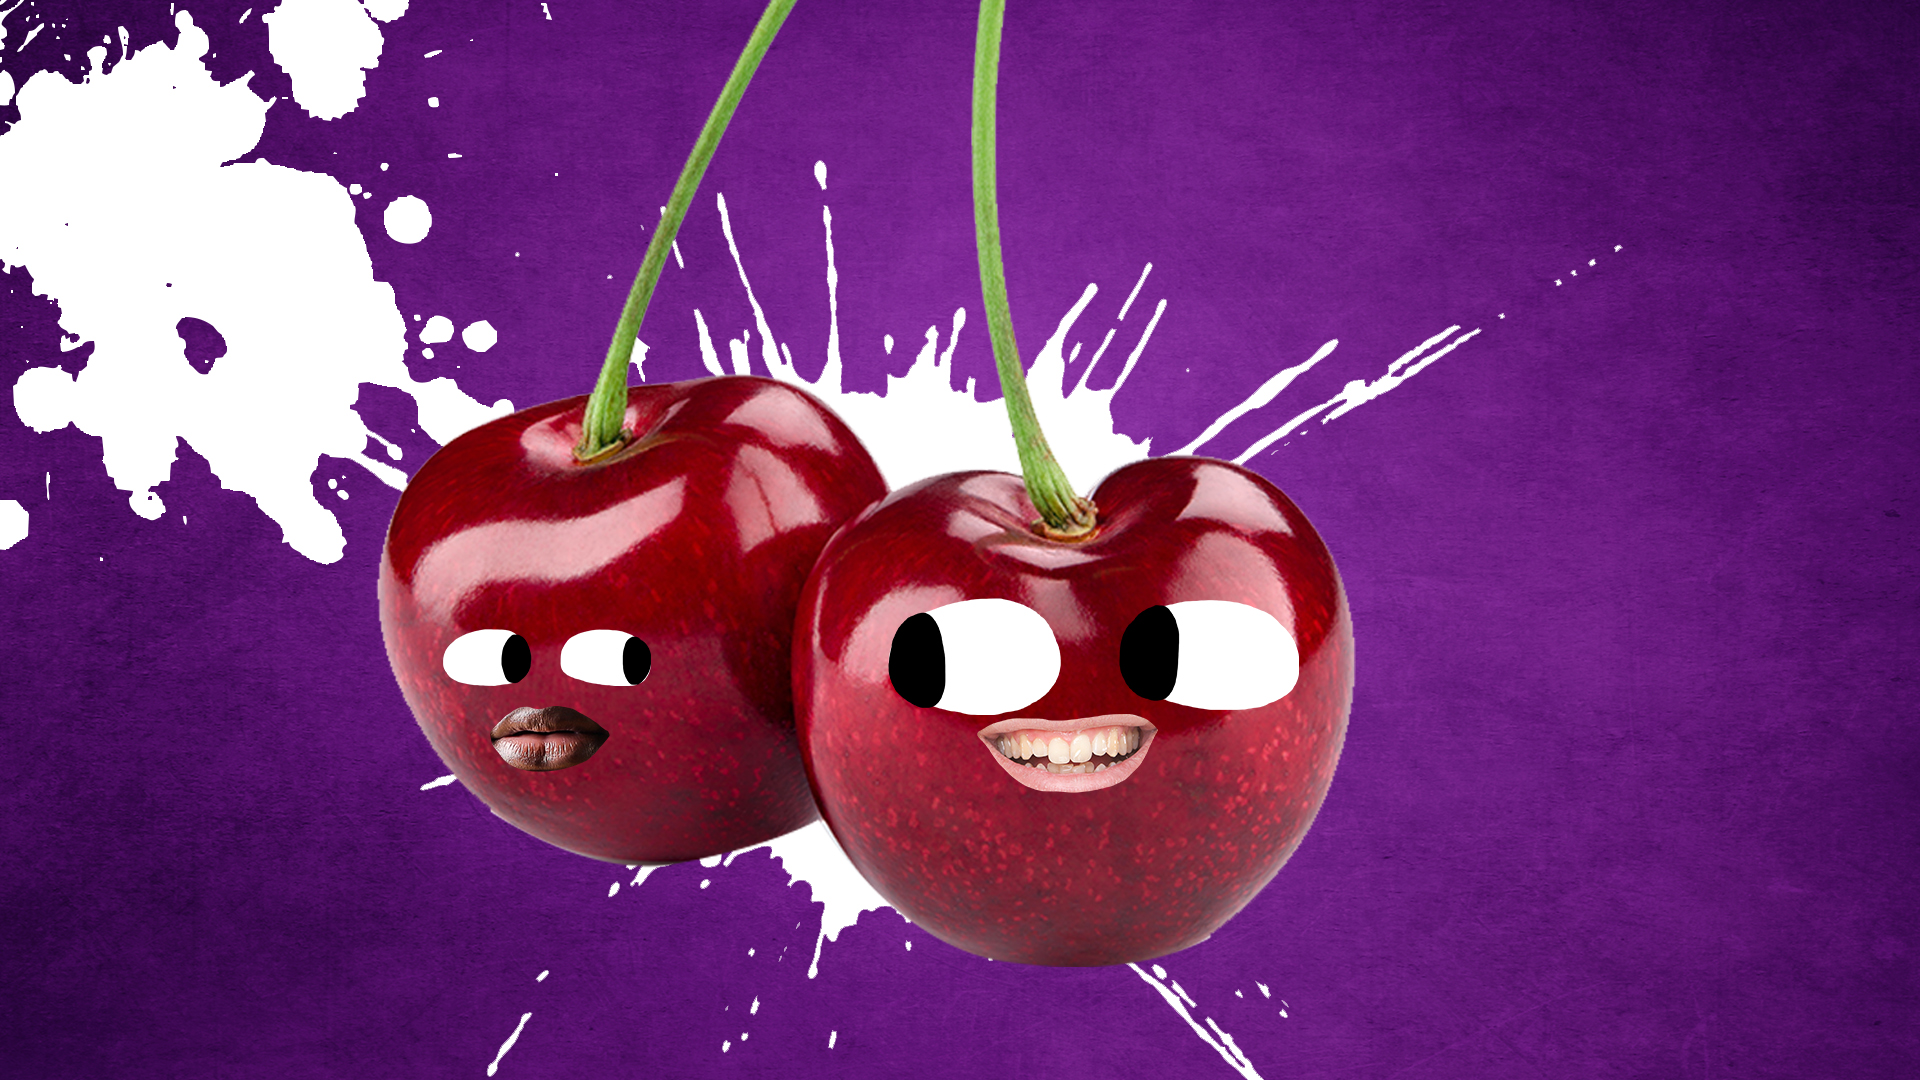 two cherries with faces look at each other